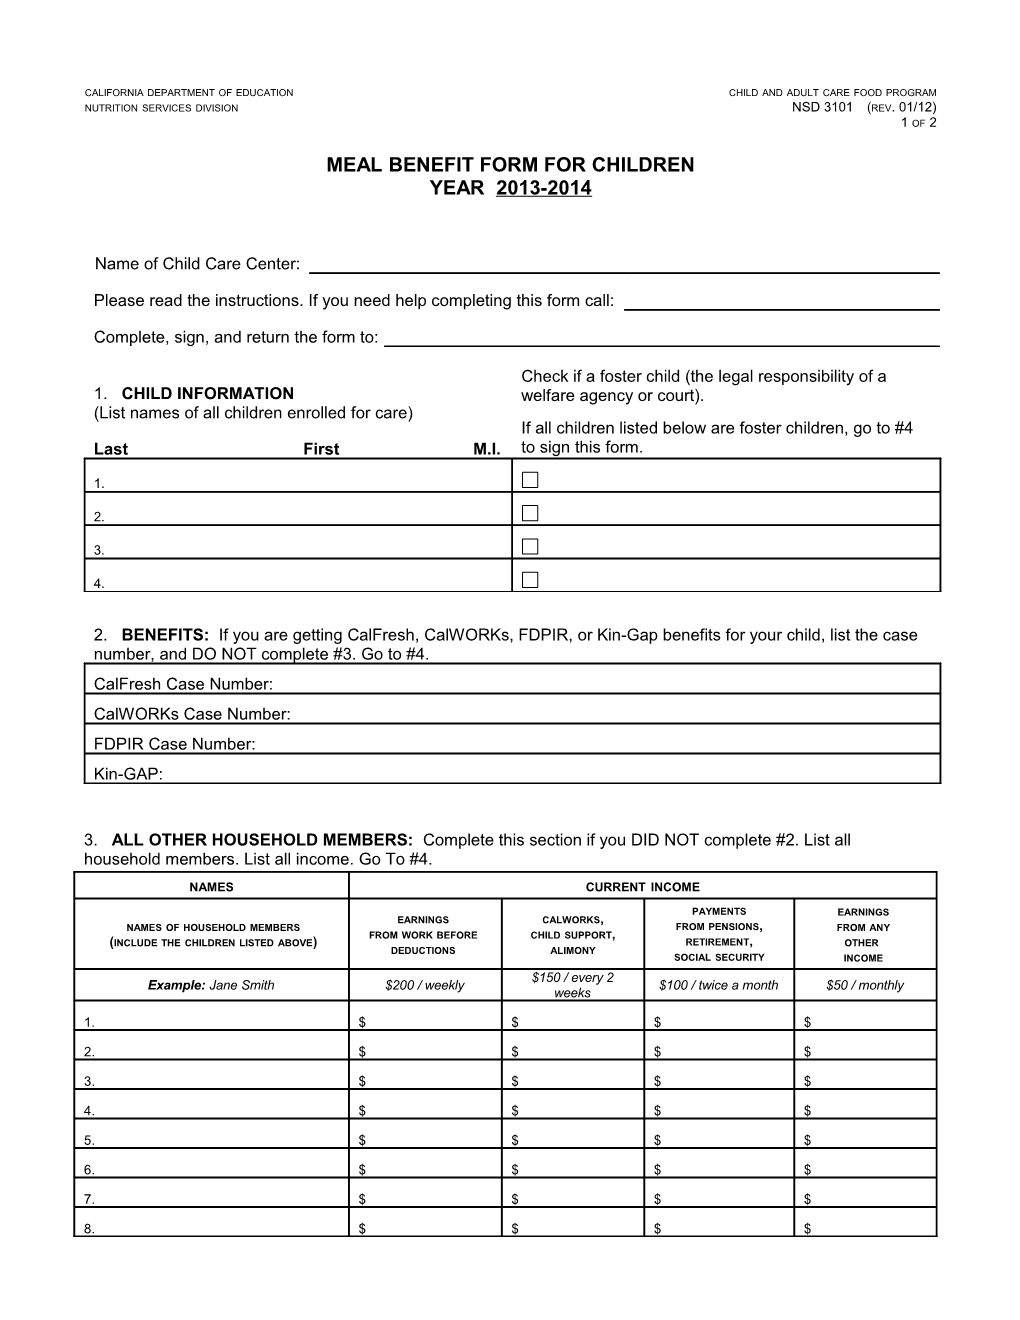 Meal Benefit Form - Child and Adult Care Food Program (CA Dept of Education) s1